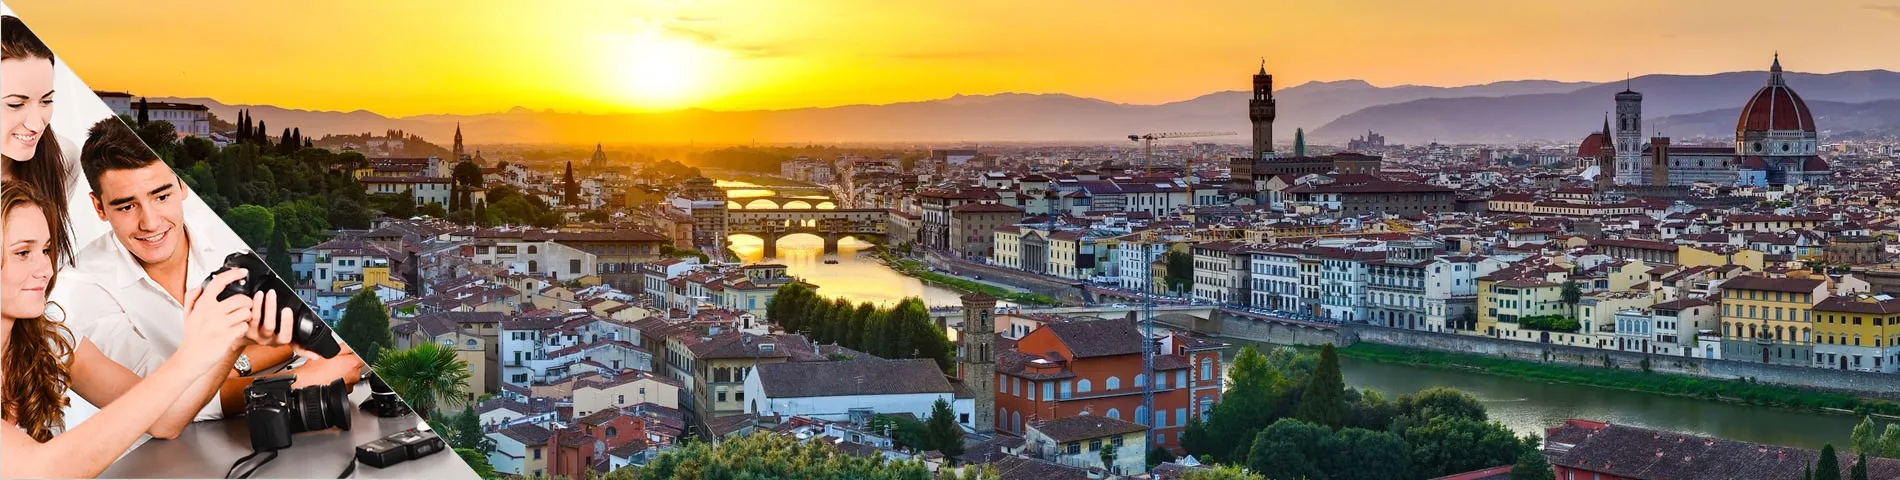 Florence - Italien & photographie